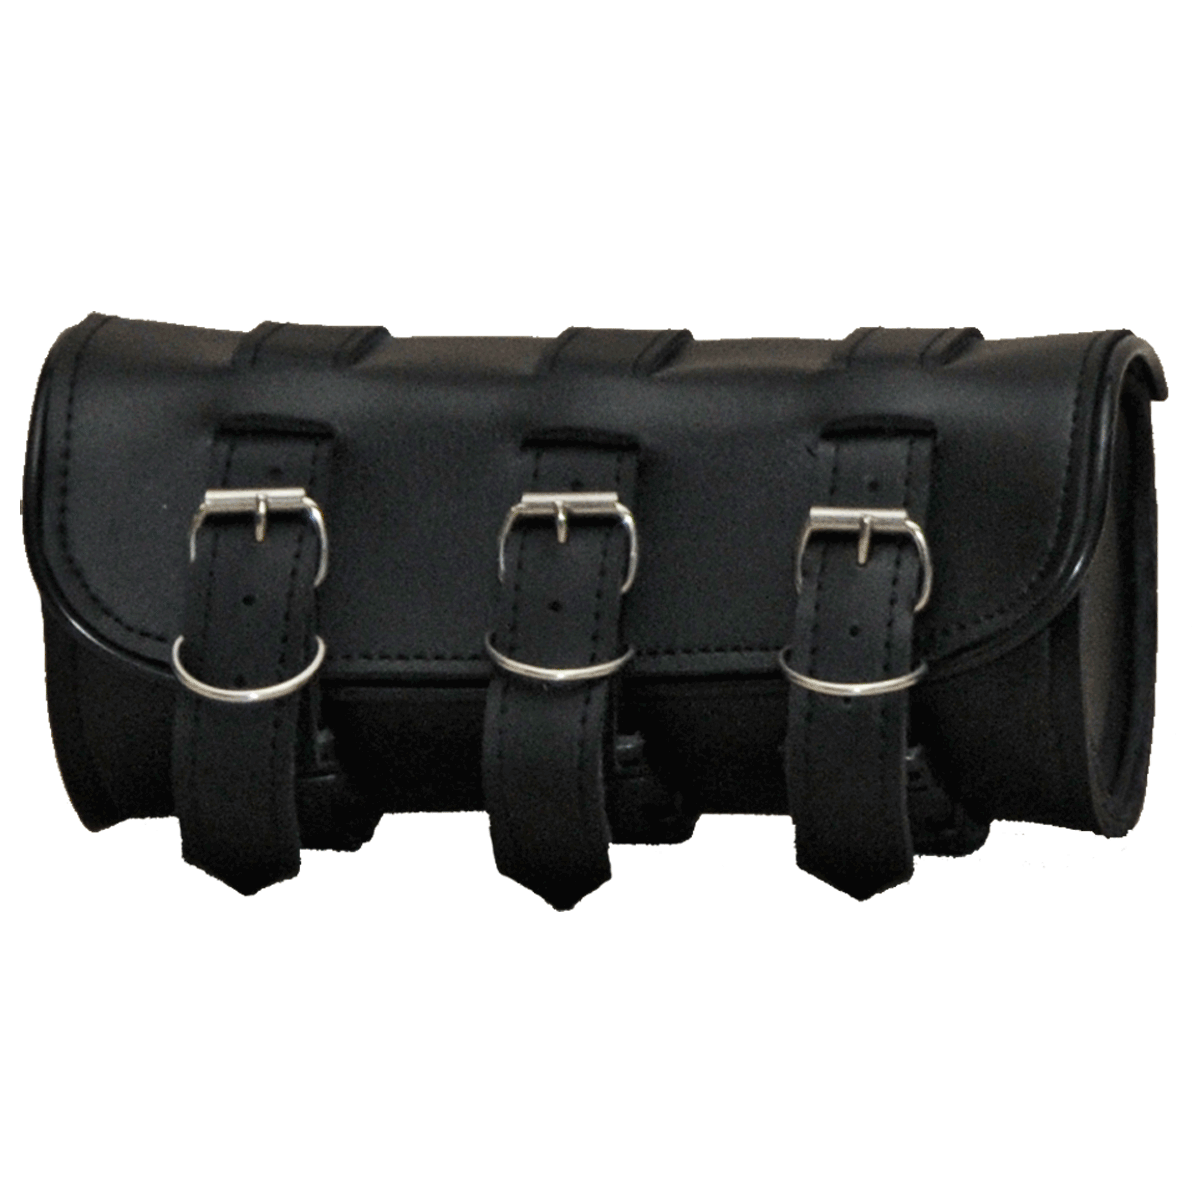 VS113H 3 Strap Plain Tool Bag with Quick Releases